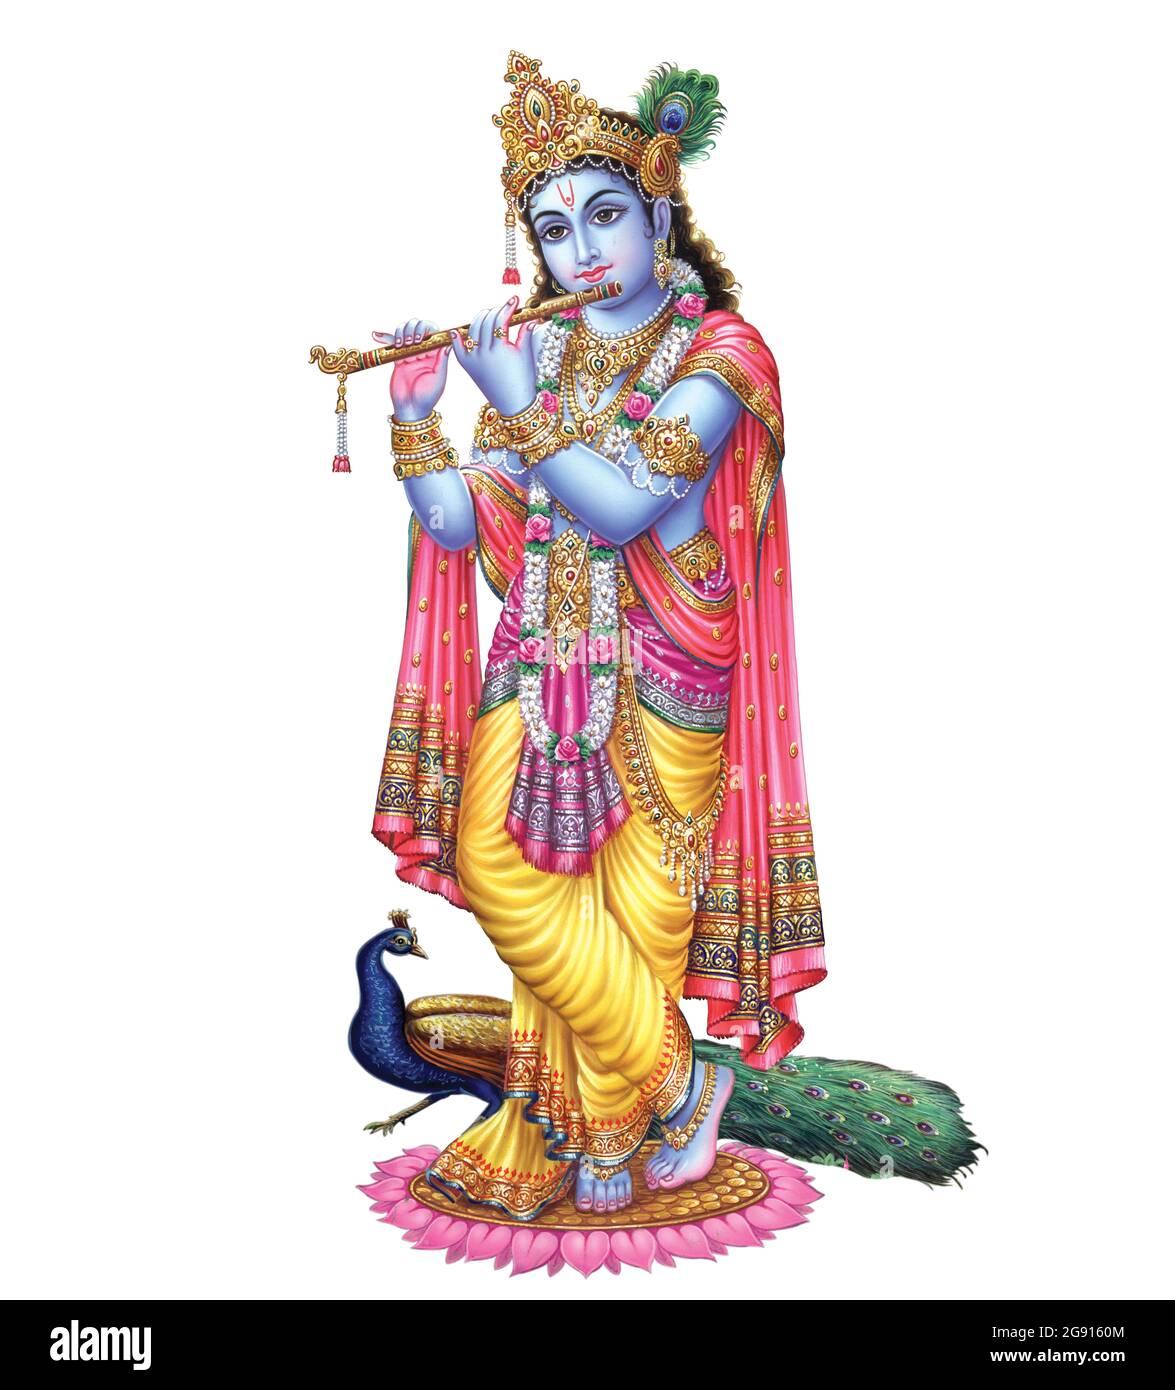 Lord krishna Cut Out Stock Images & Pictures - Alamy